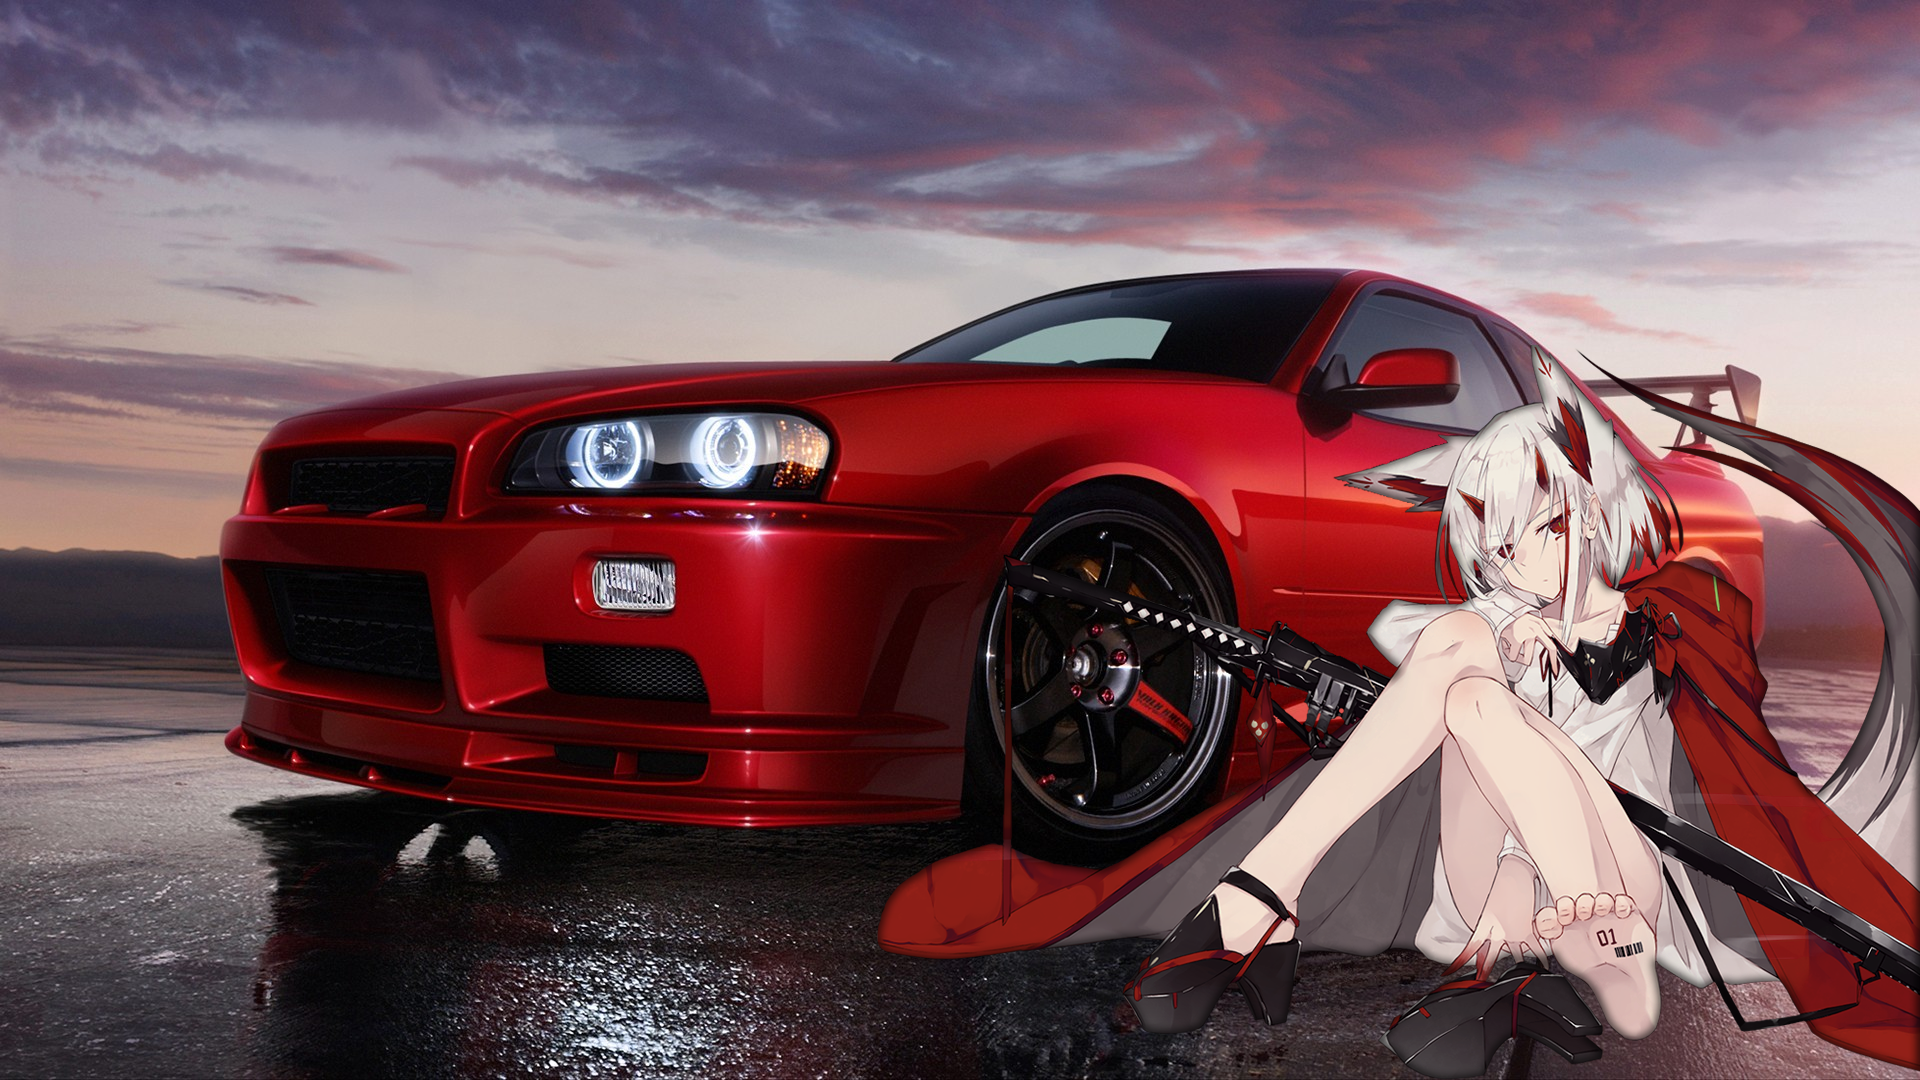 410762 JDM toyota aristo anime girls pictureinpicture  Rare Gallery  HD Wallpapers